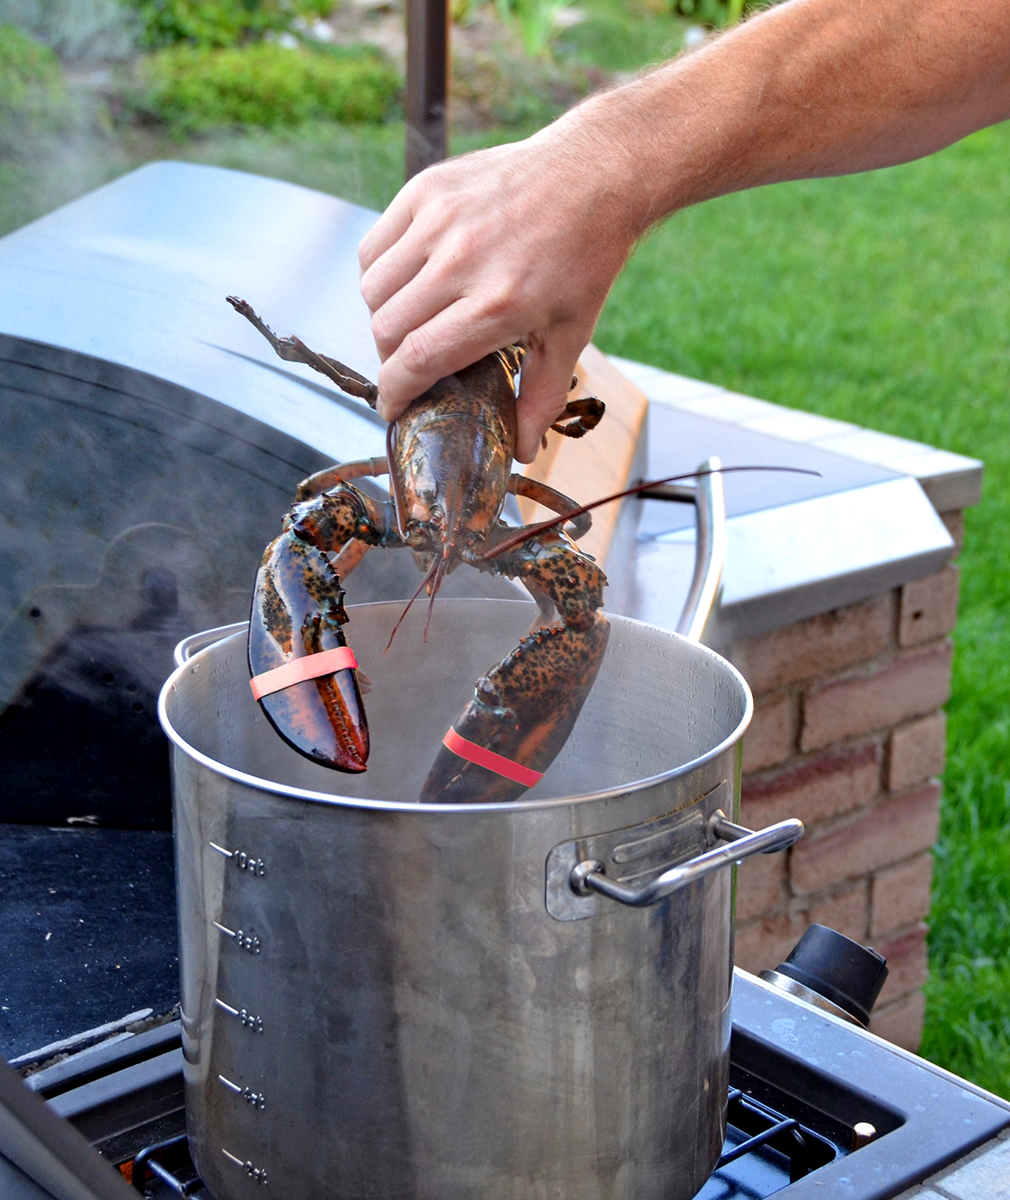 Dropping a lobster in the pot.